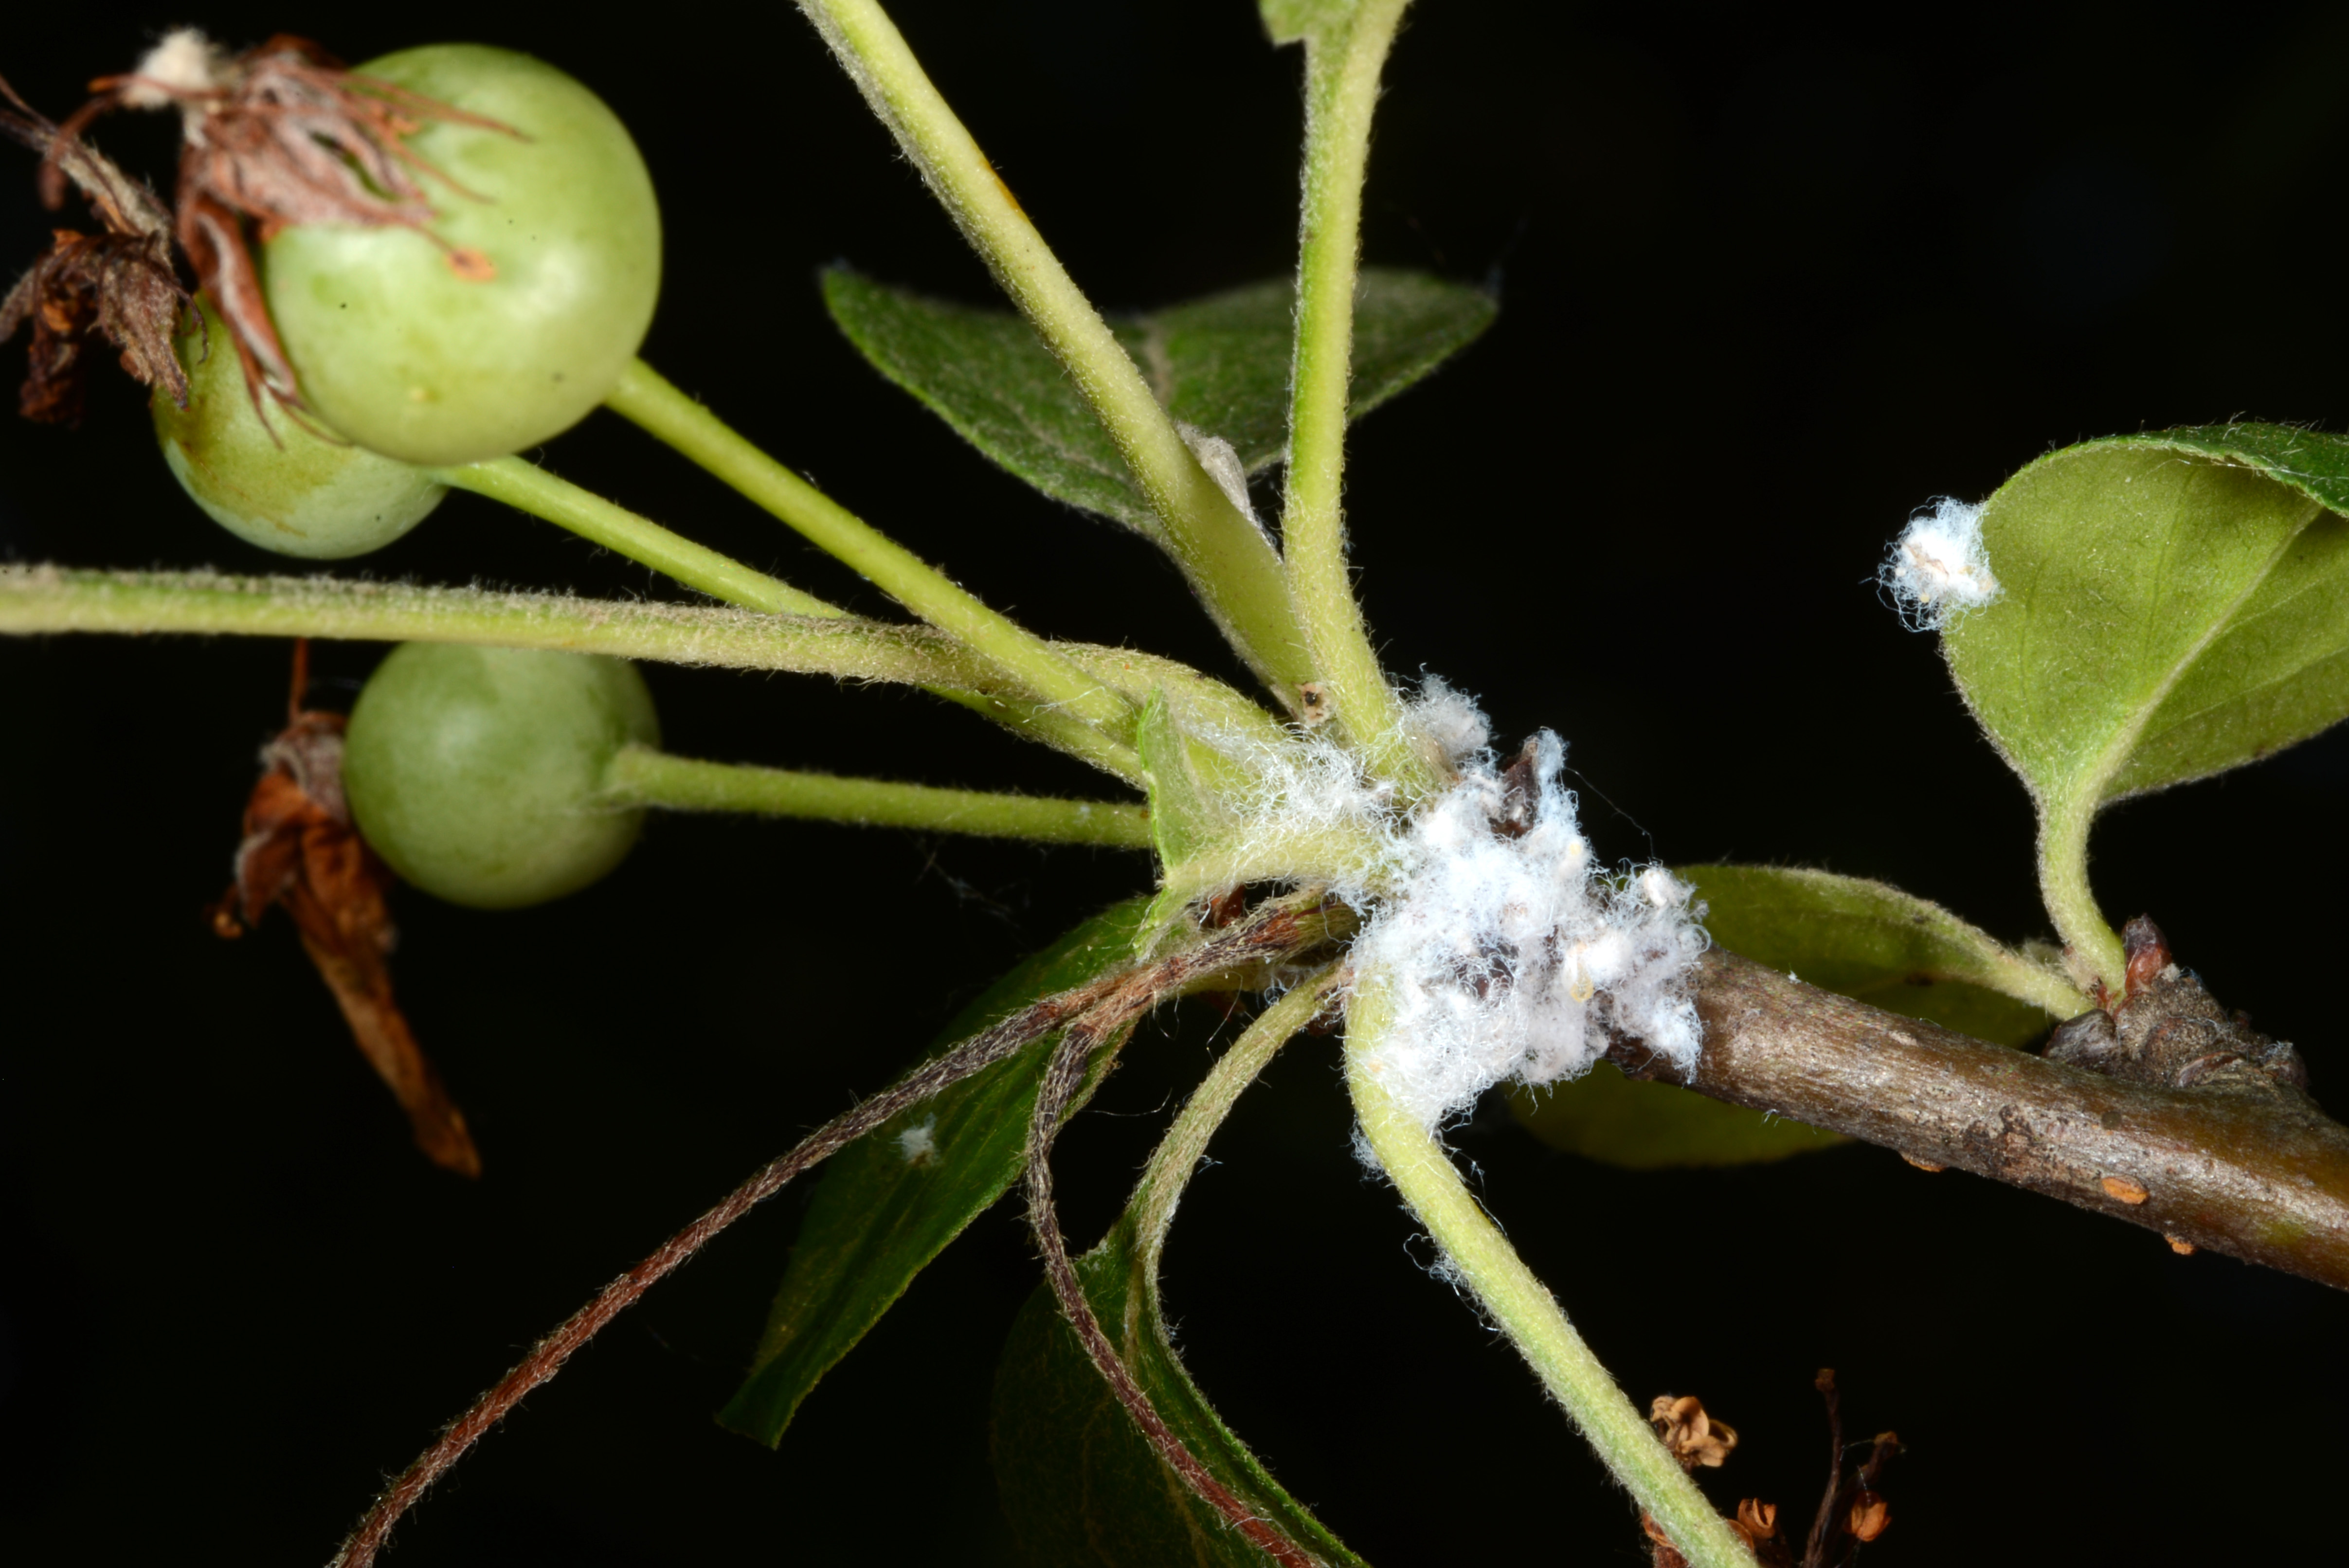 Figure 4. A group of woolly apple aphids, concealed by their waxy secretions, on the end of a crabapple branch. (<em>Photo credit: John Obermeyer, Purdue Entomology</em>)